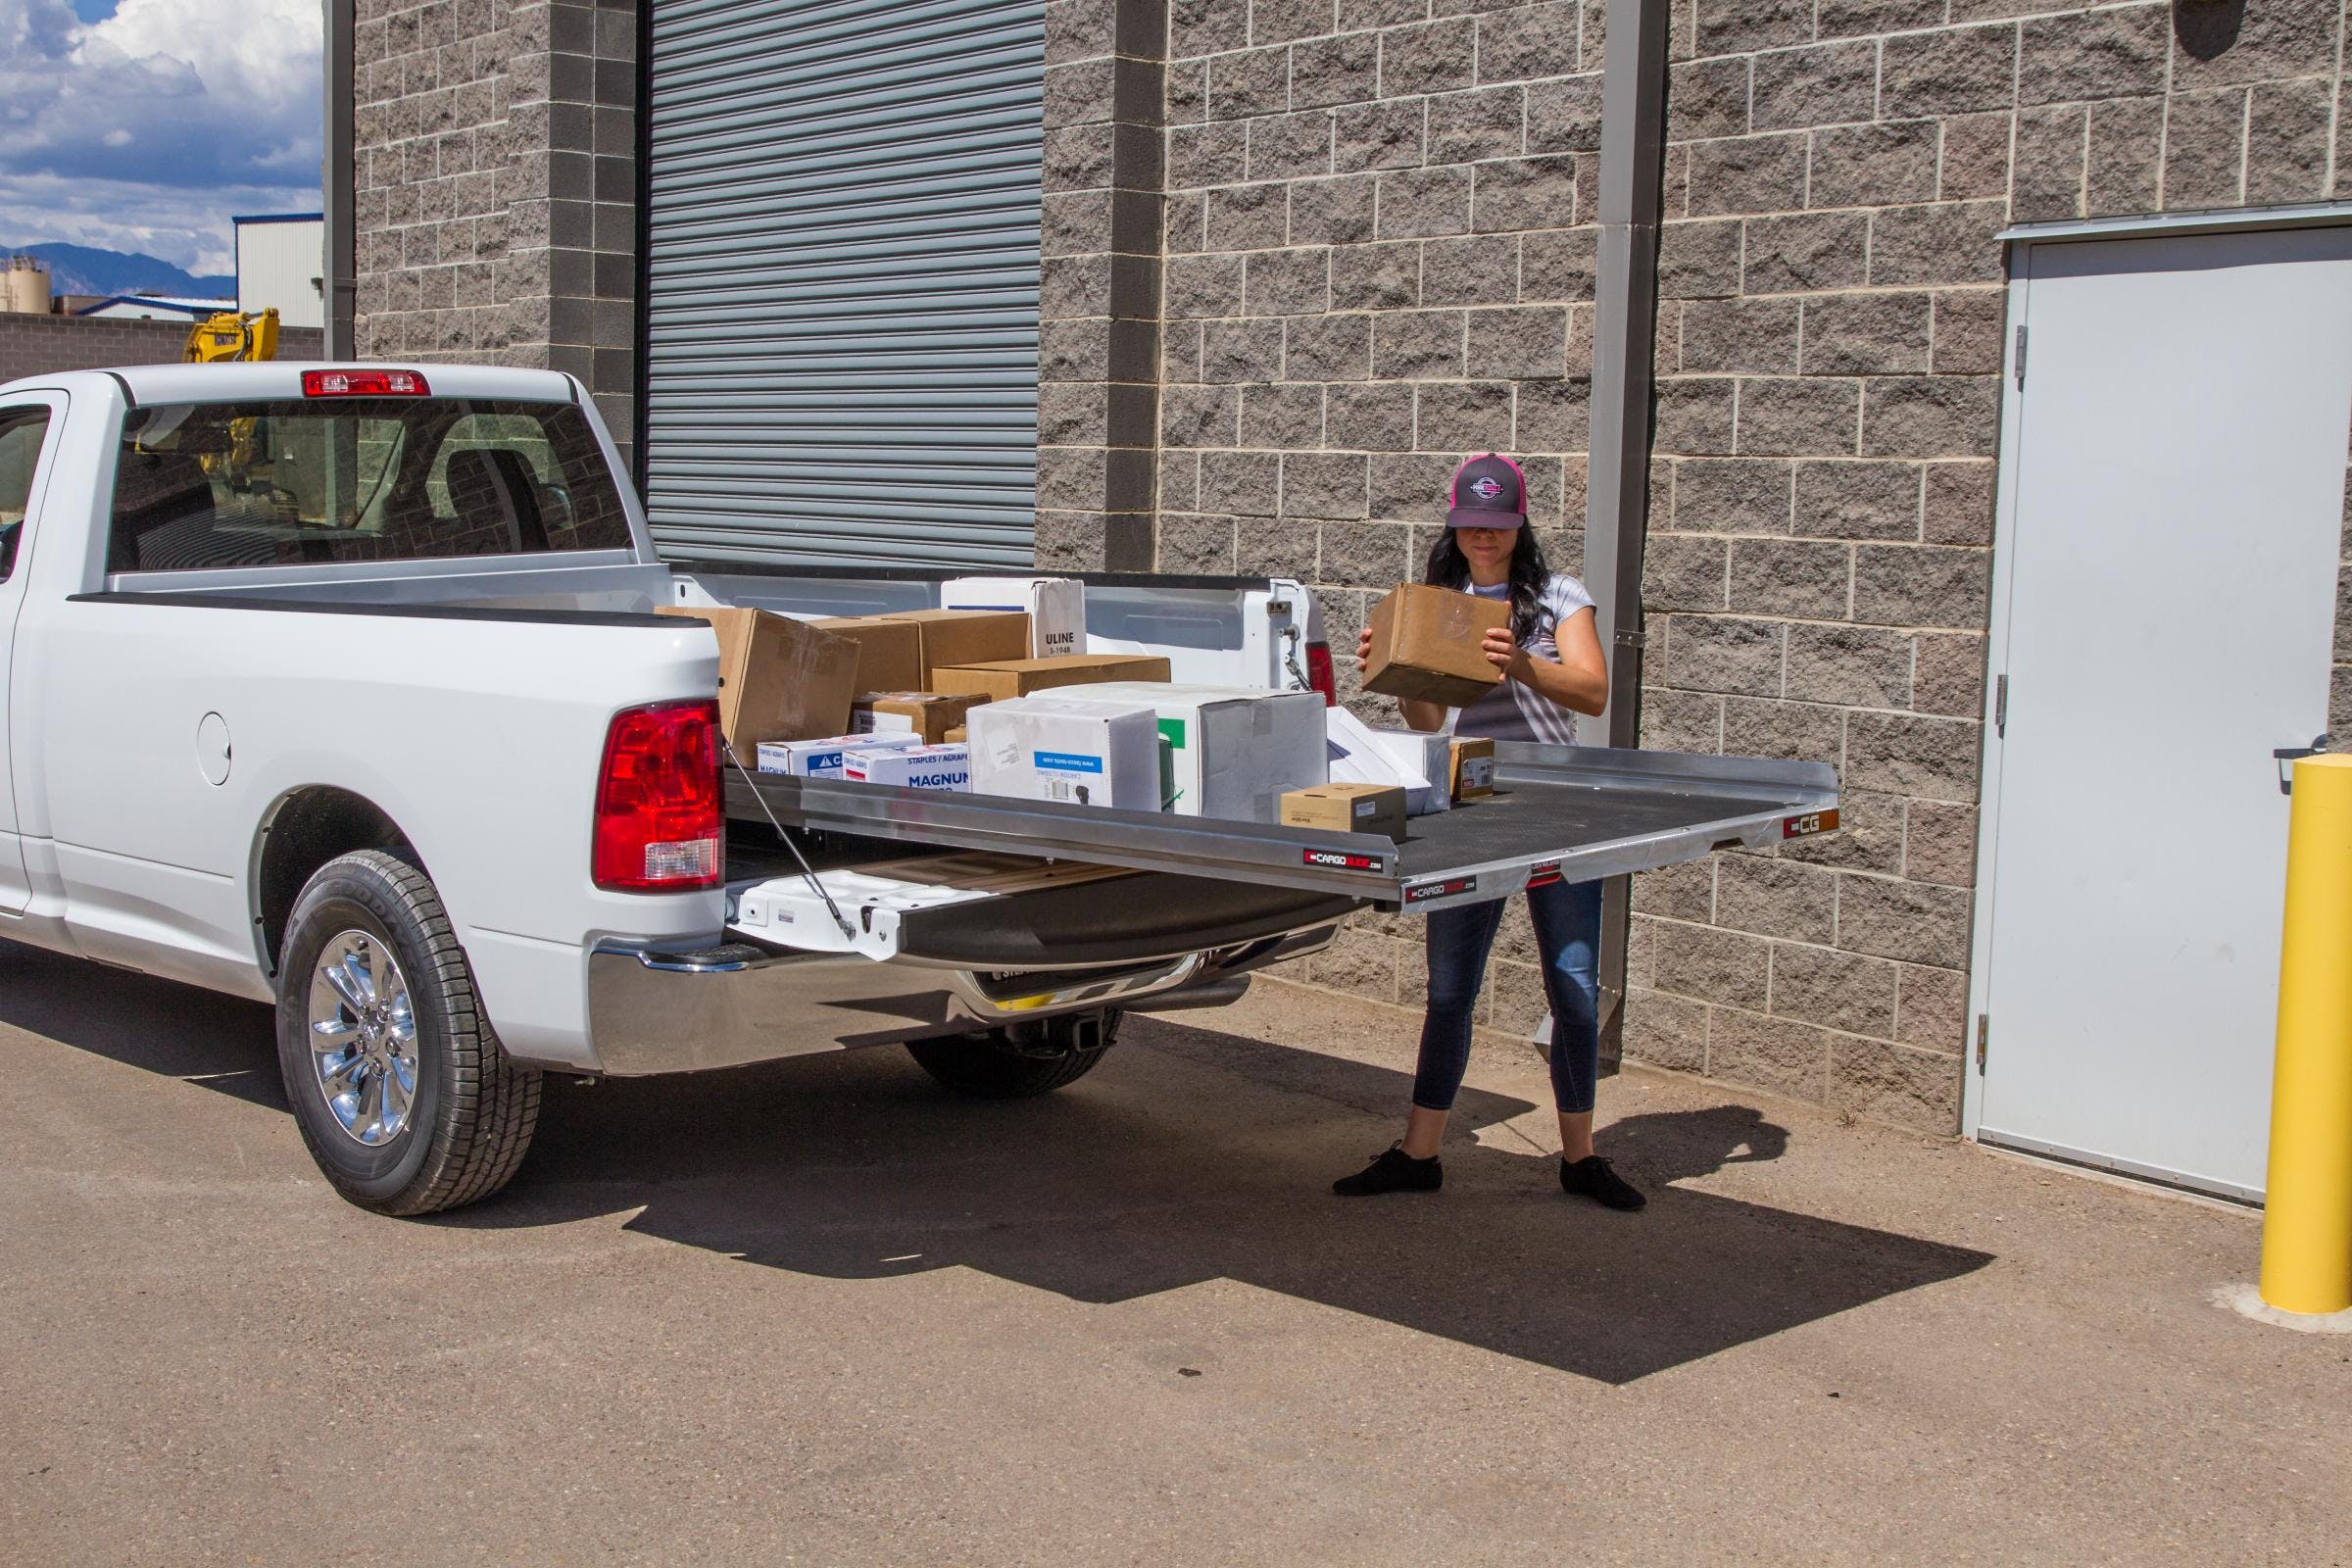 DECKED CG1000-9548 Slide Out Cargo Tray, 1000 lb capacity, 65% Ext, 6 bearings, Alum Tie-Down Rails